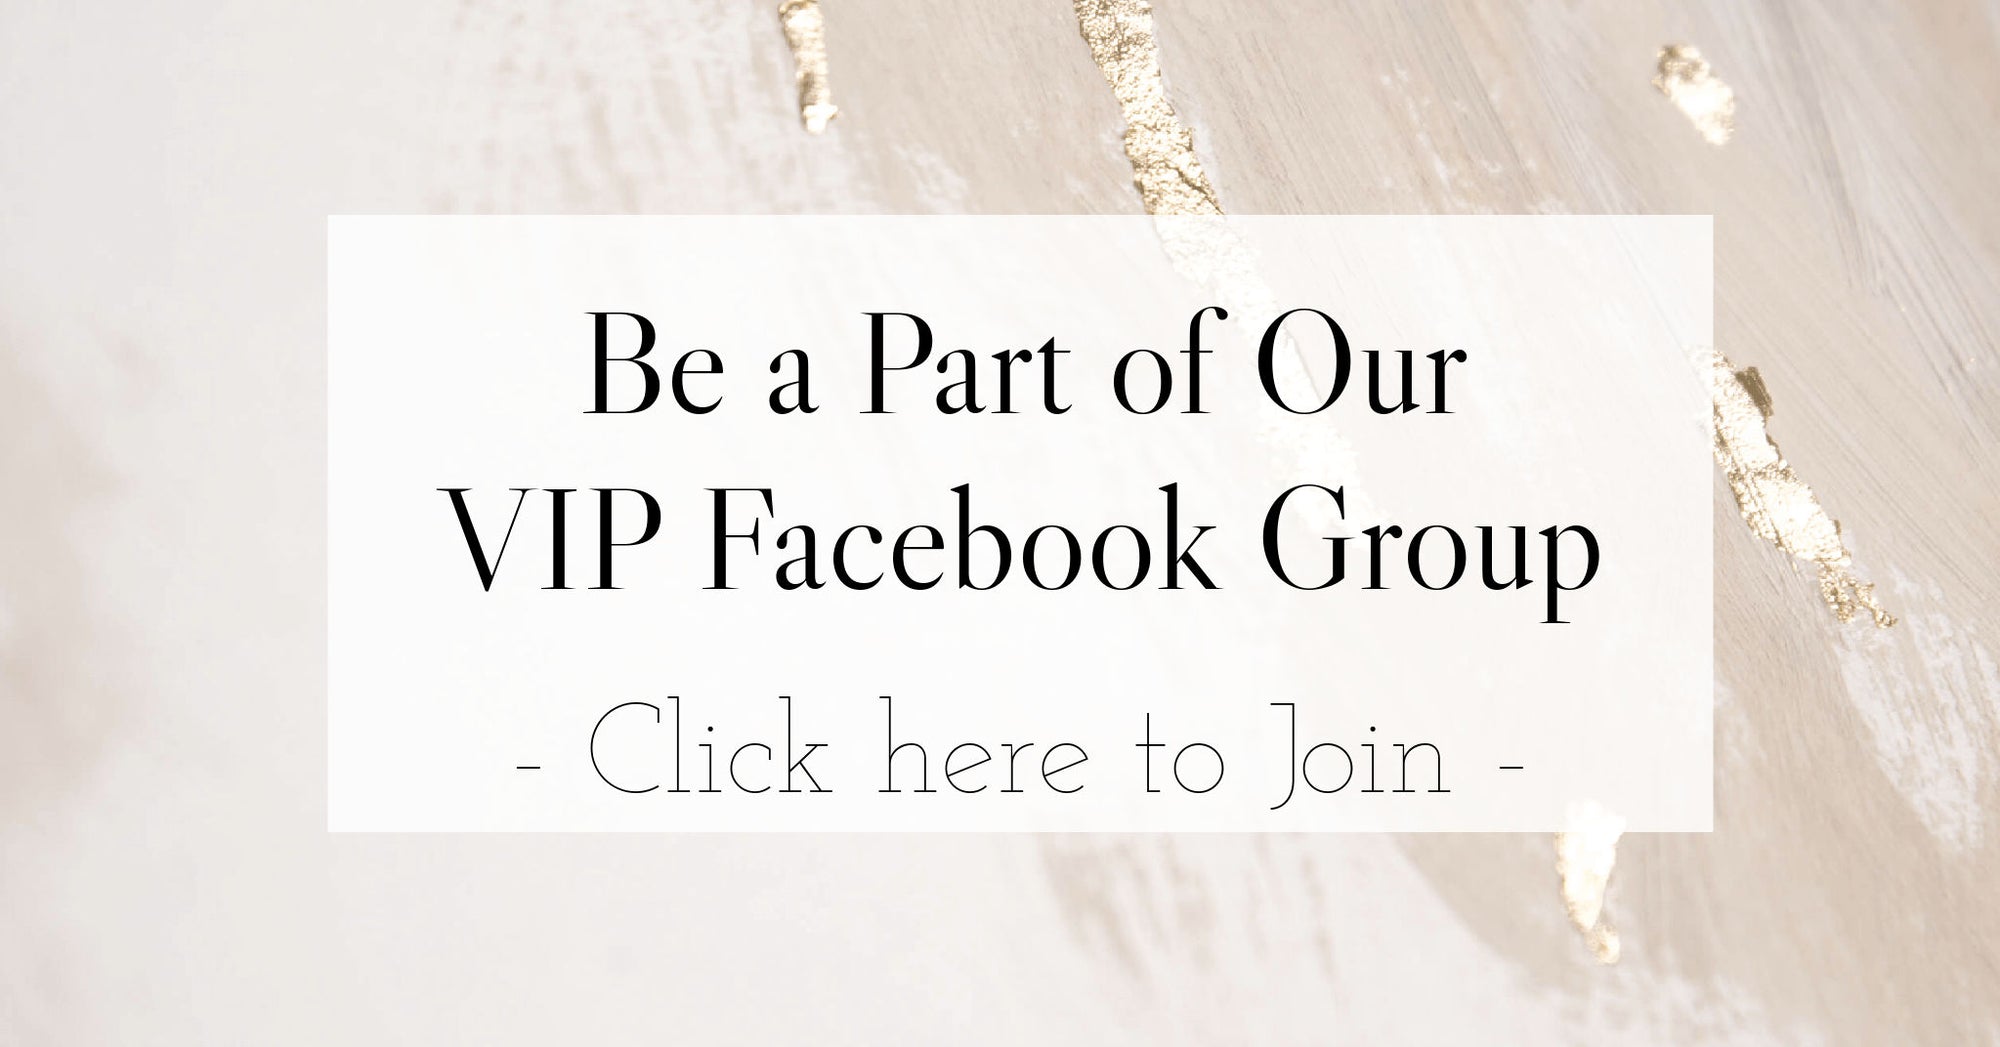 Be a Part of our VIP Facebook Group. Click here to join for exclusive discounts, insider news and fashion advice.